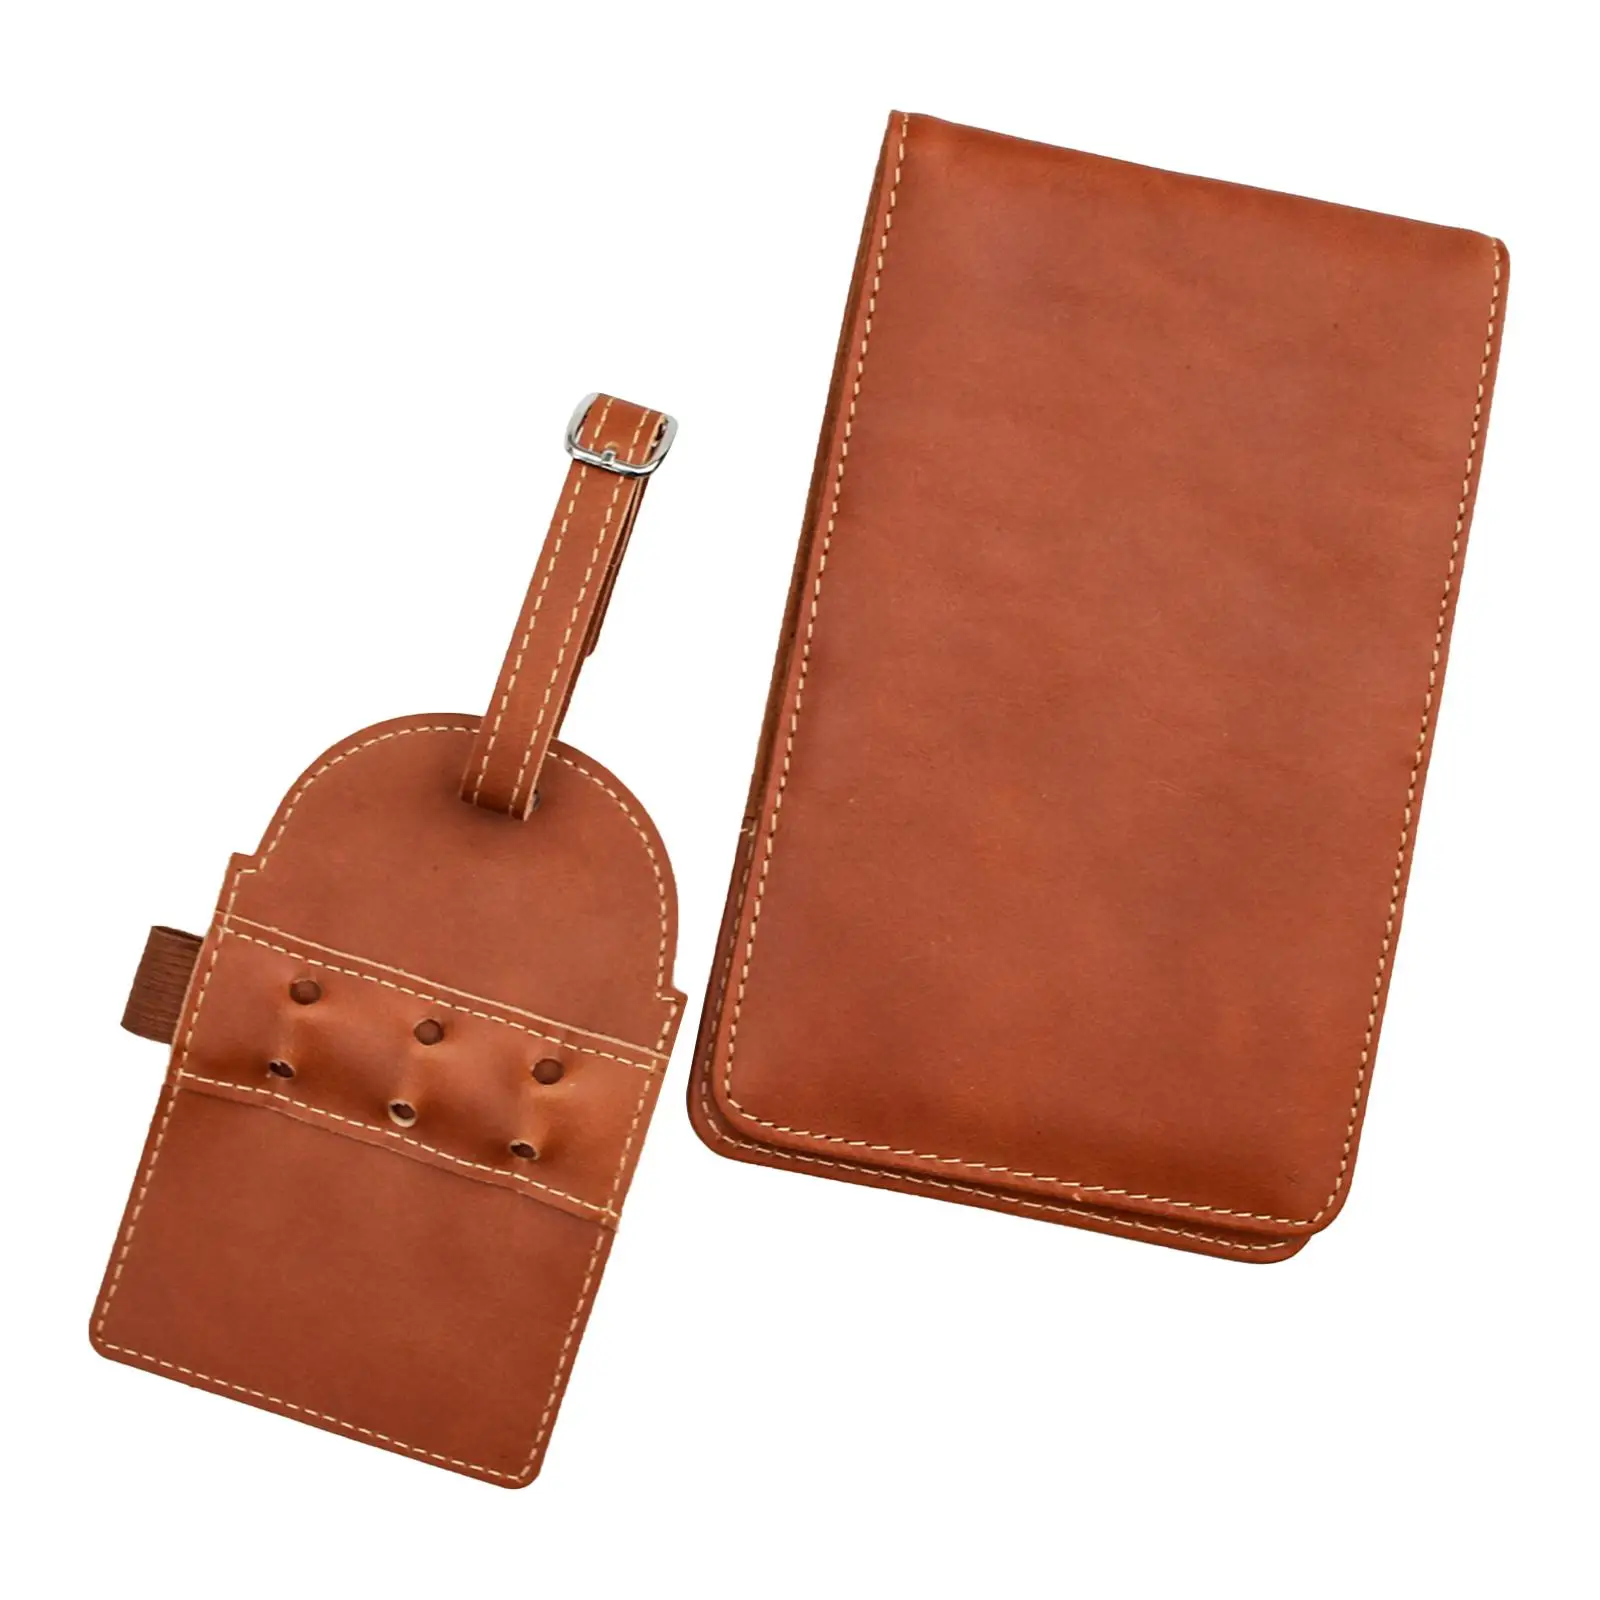 PU Golf Scorecard Holder W/ Tees Holder PU Leather Easy to Use Journal for Golf Golfer Practicing Golfing Recording Training